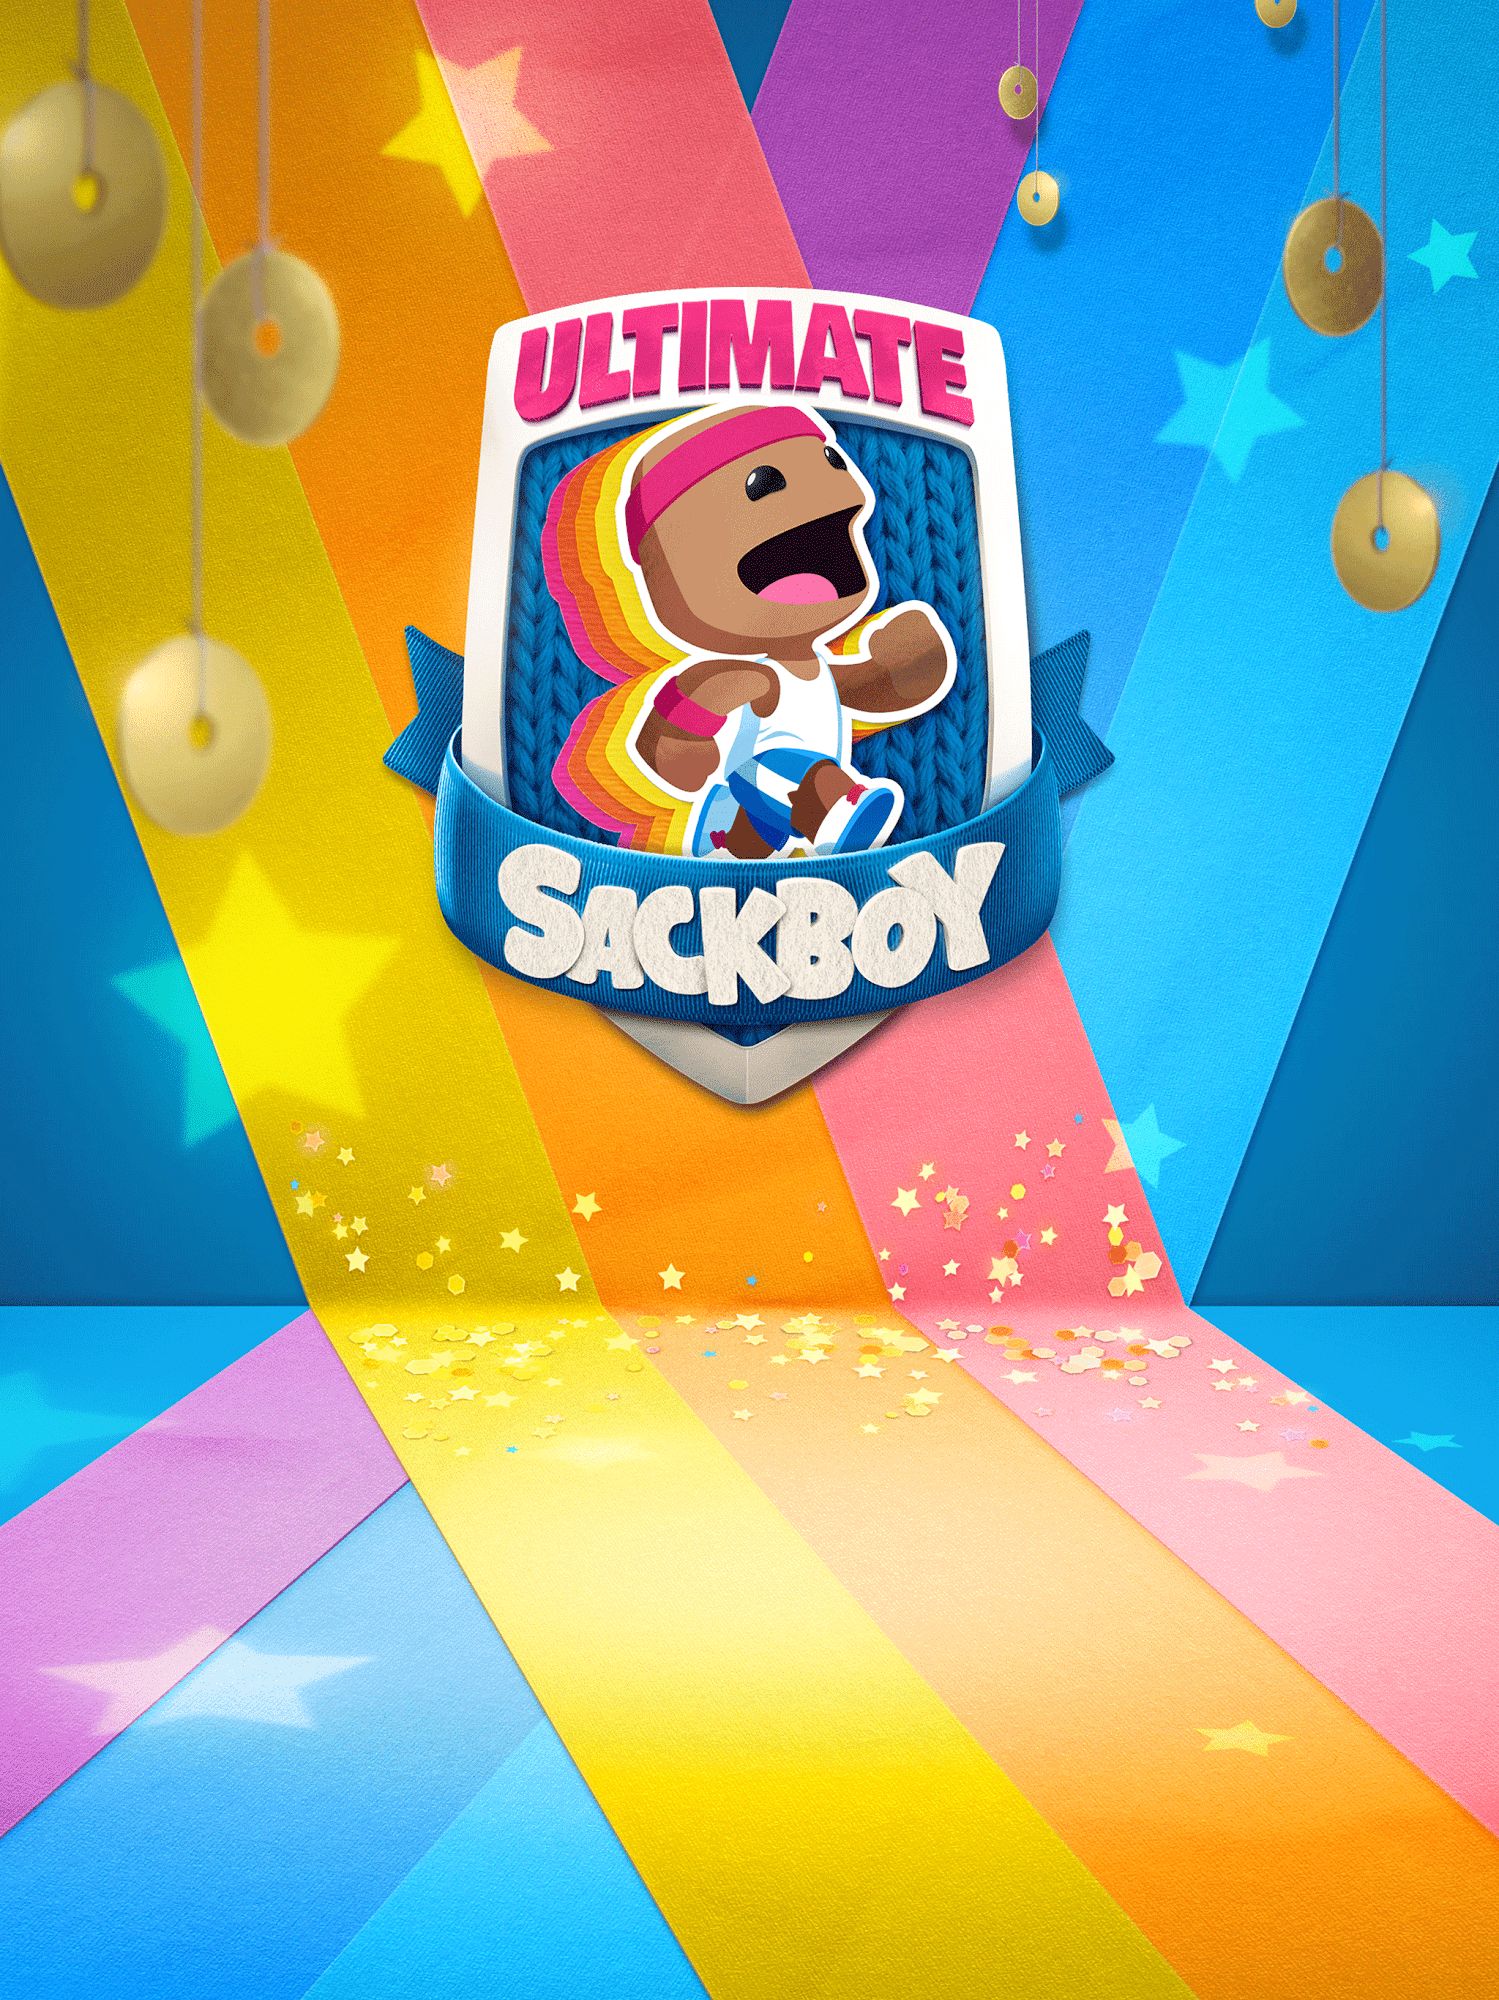 Ultimate Sackboy for Android